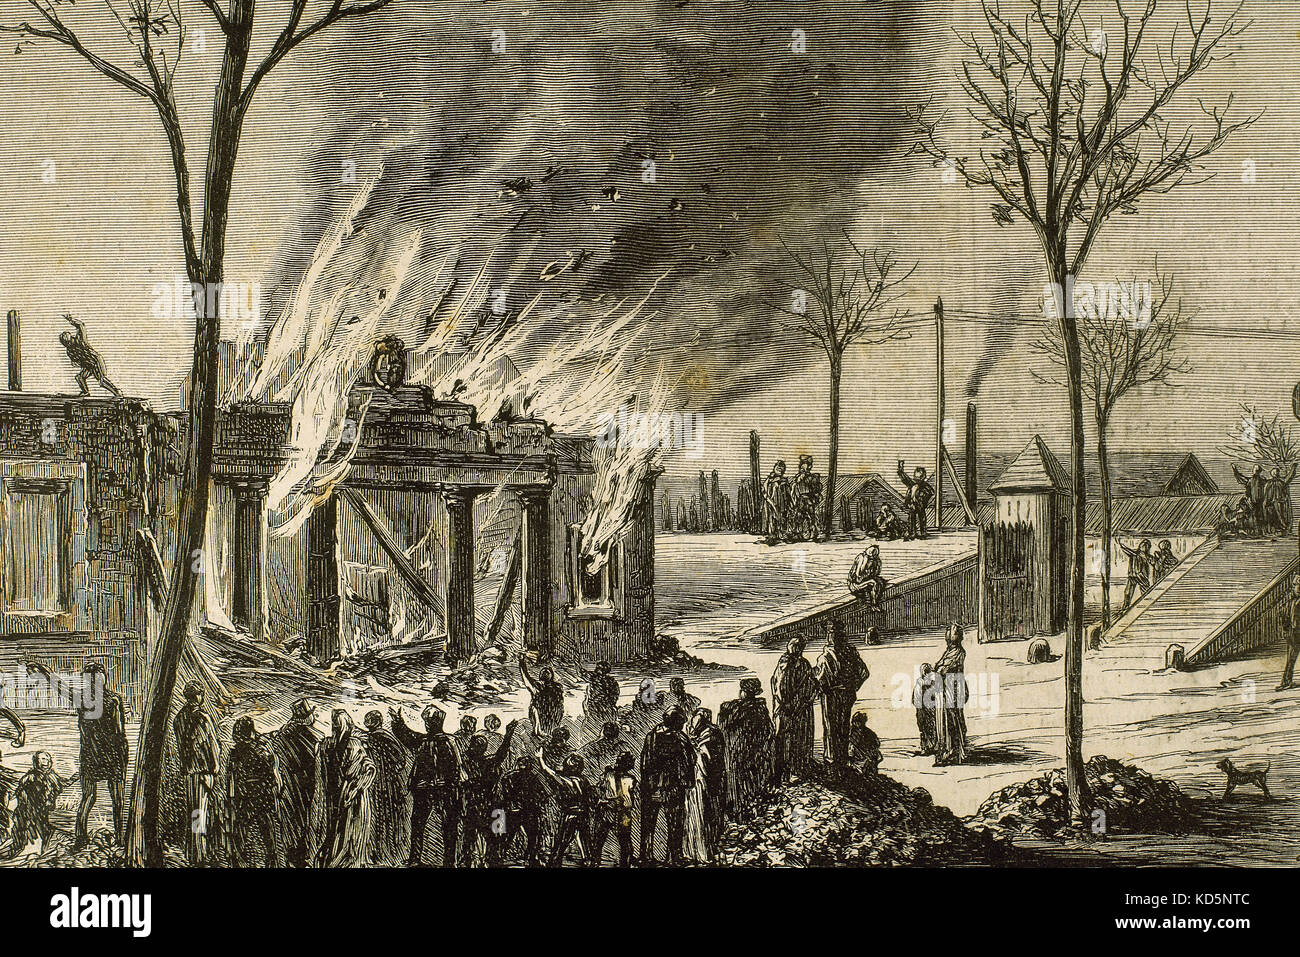 Spain. Catalonia. Barcelona. Fire in a house of the taxes' collection (fielato) in the outskirts of the Portal de San Carlos in 1872. Violent acts due to the unpopularity of the consumption tax. Engraving by Capuz. "La Ilustracion Espanola y Americana", 1872. Stock Photo